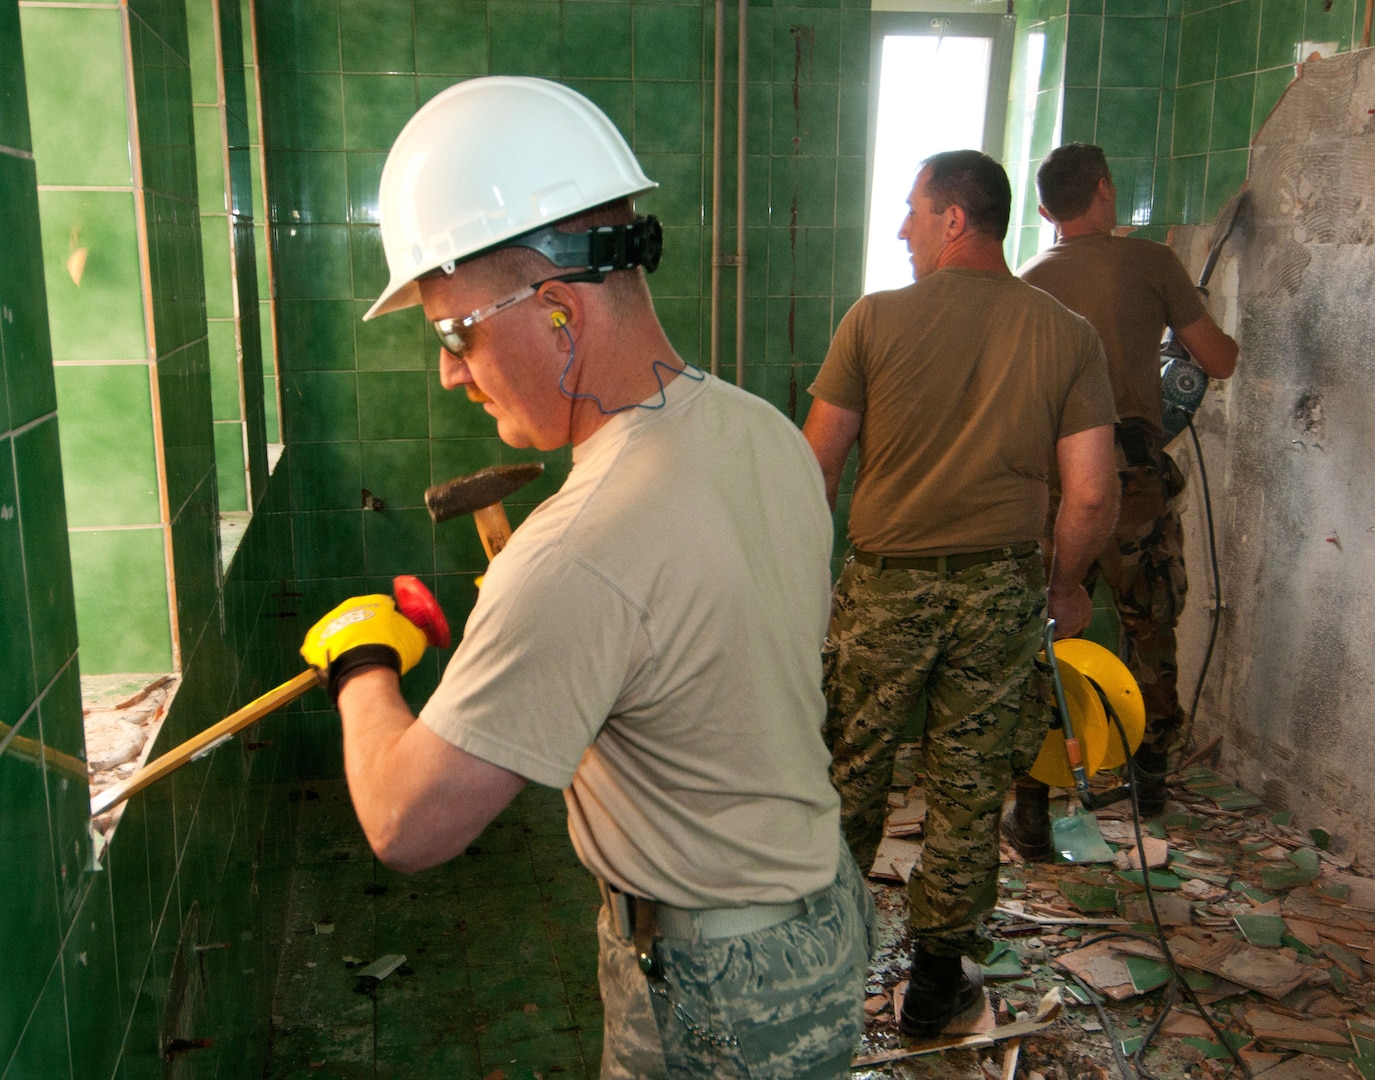 U.S. Air Force Master Sgt. Steven Virnig, 133rd Civil Engineering Squadron, removes tile from an elementary school bathroom in Ogulin, Croatia, June 17, 2014. The school bathrooms are being renovated by Airmen from the 133rd and 148th Civil Engineering Squadron, and 219th Red Horse Squadron in partnership with the Croatian Army. Croatia is a Minnesota State Partner under the National Guard State Partnership Program. 